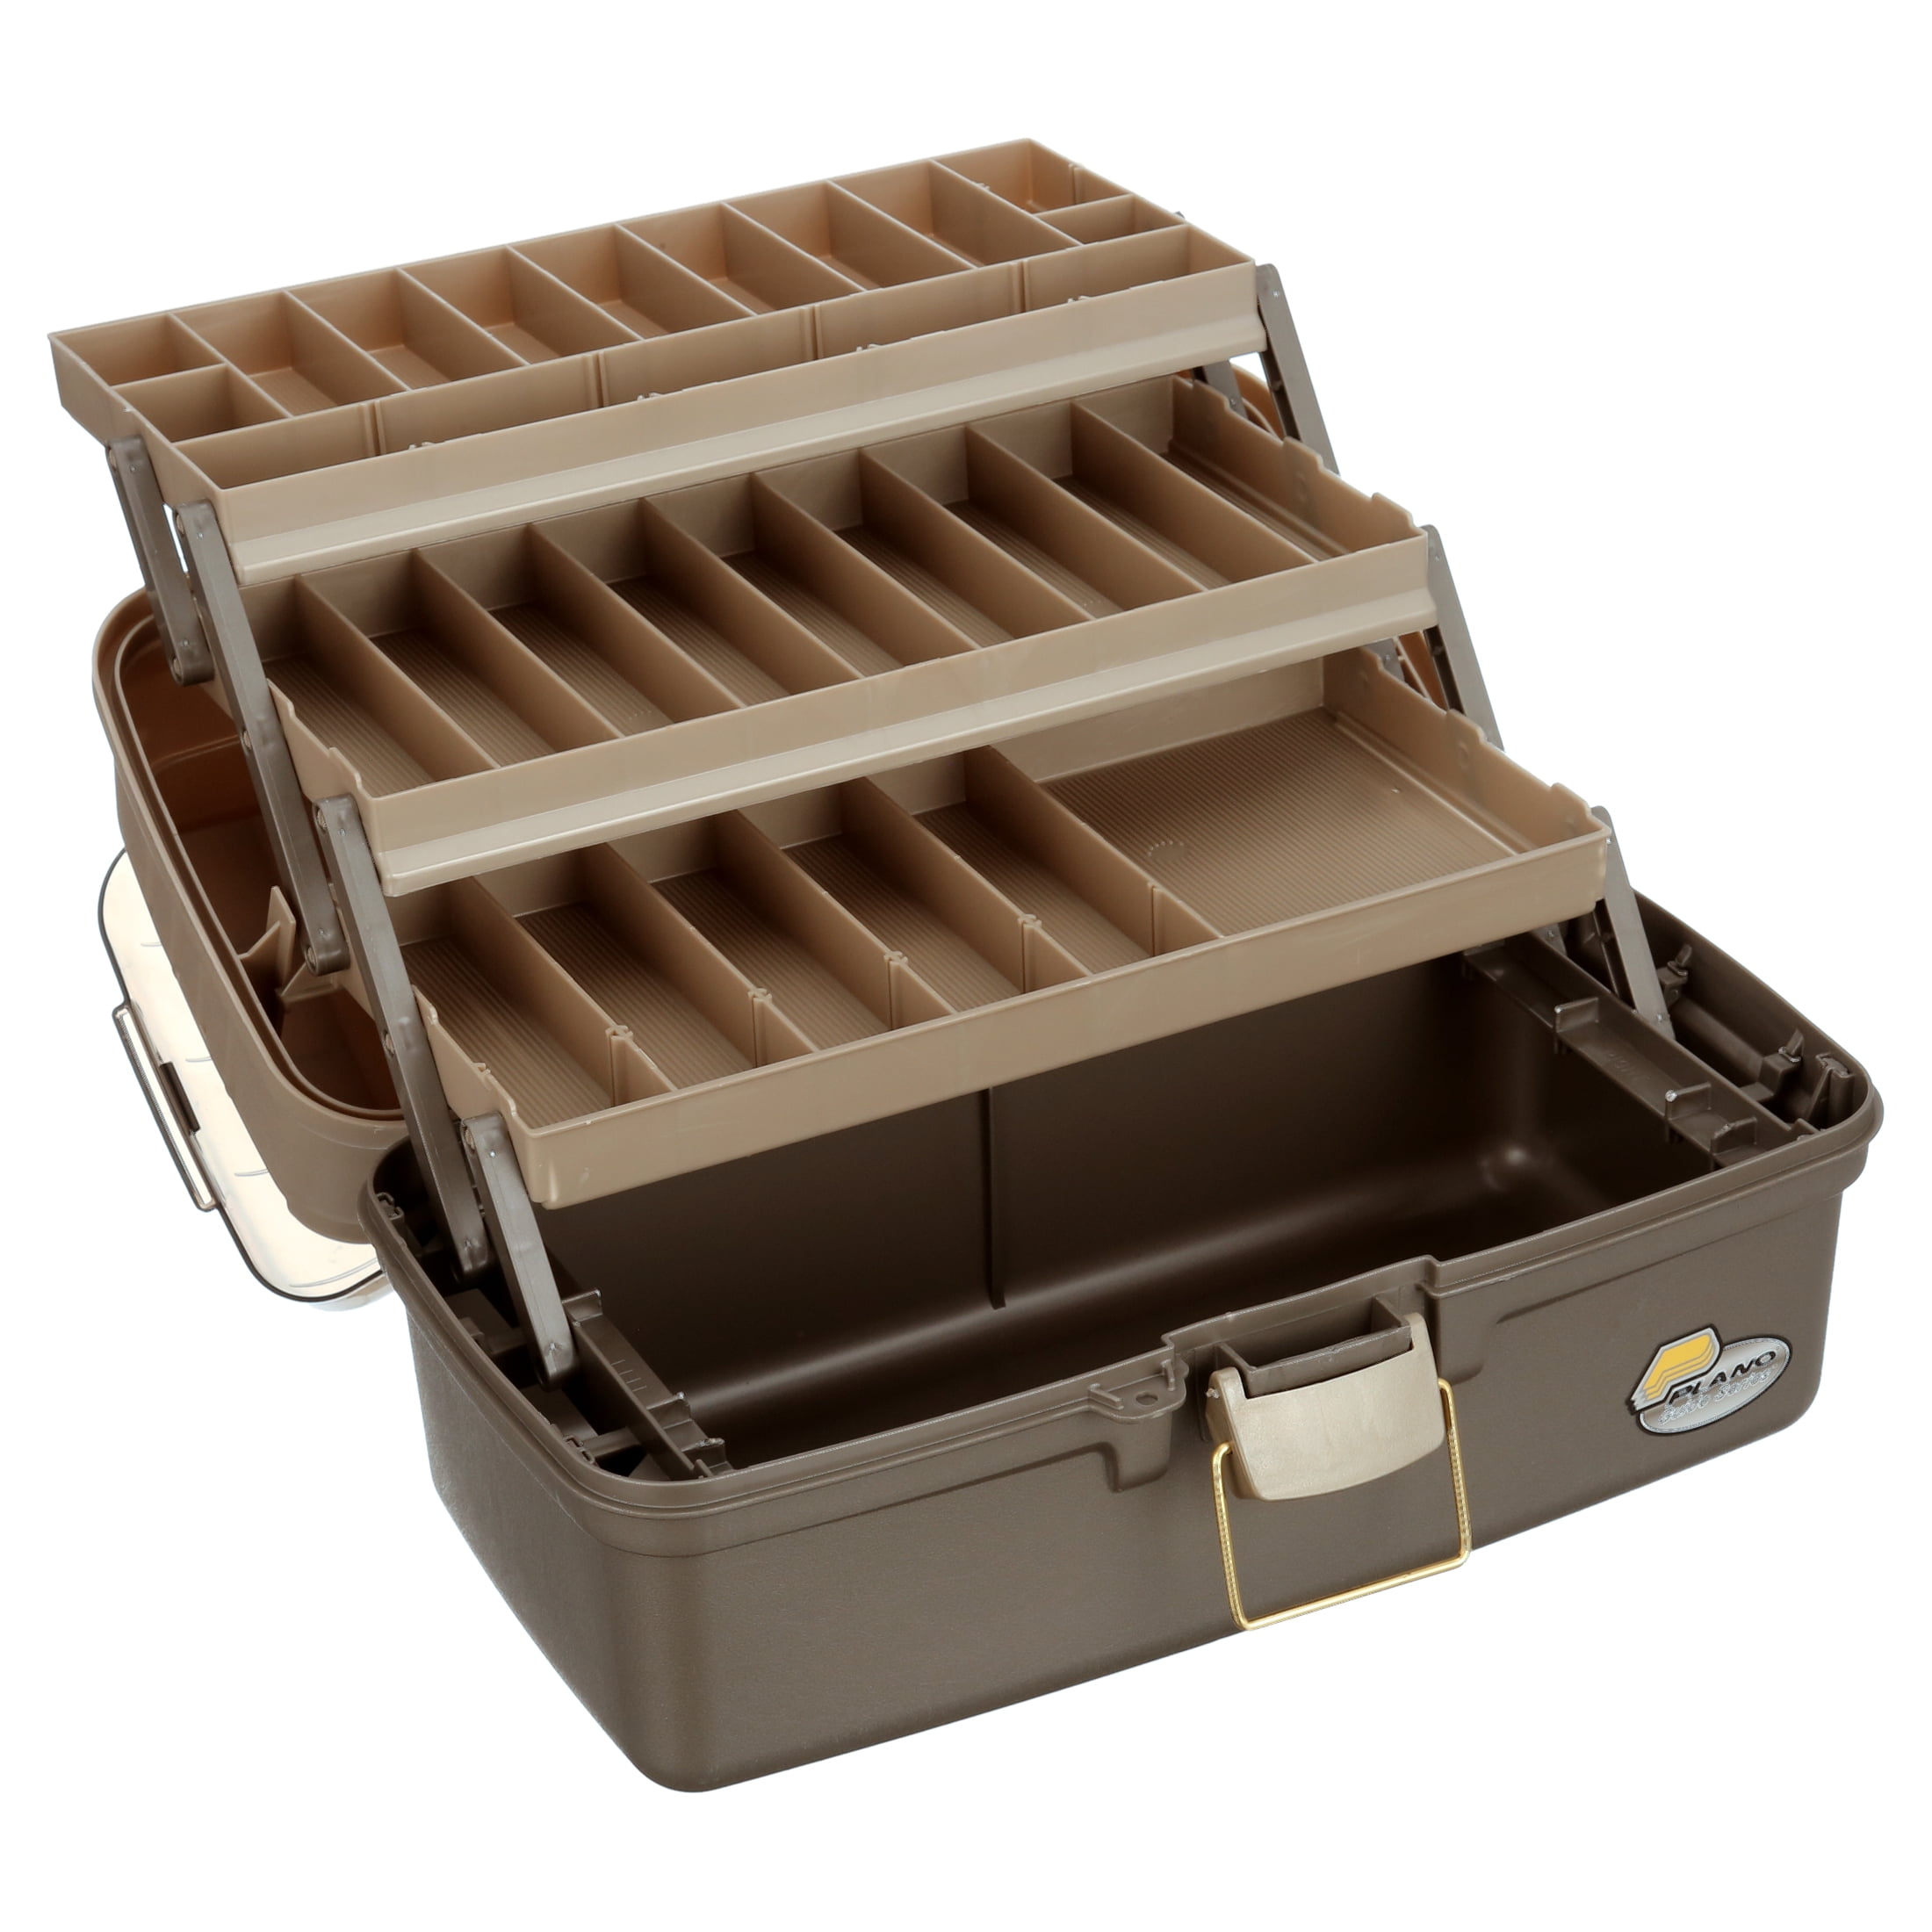 Plano Fishing Large 3-Tray Tackle Box with Top Access, Graphite/ Sandstone  